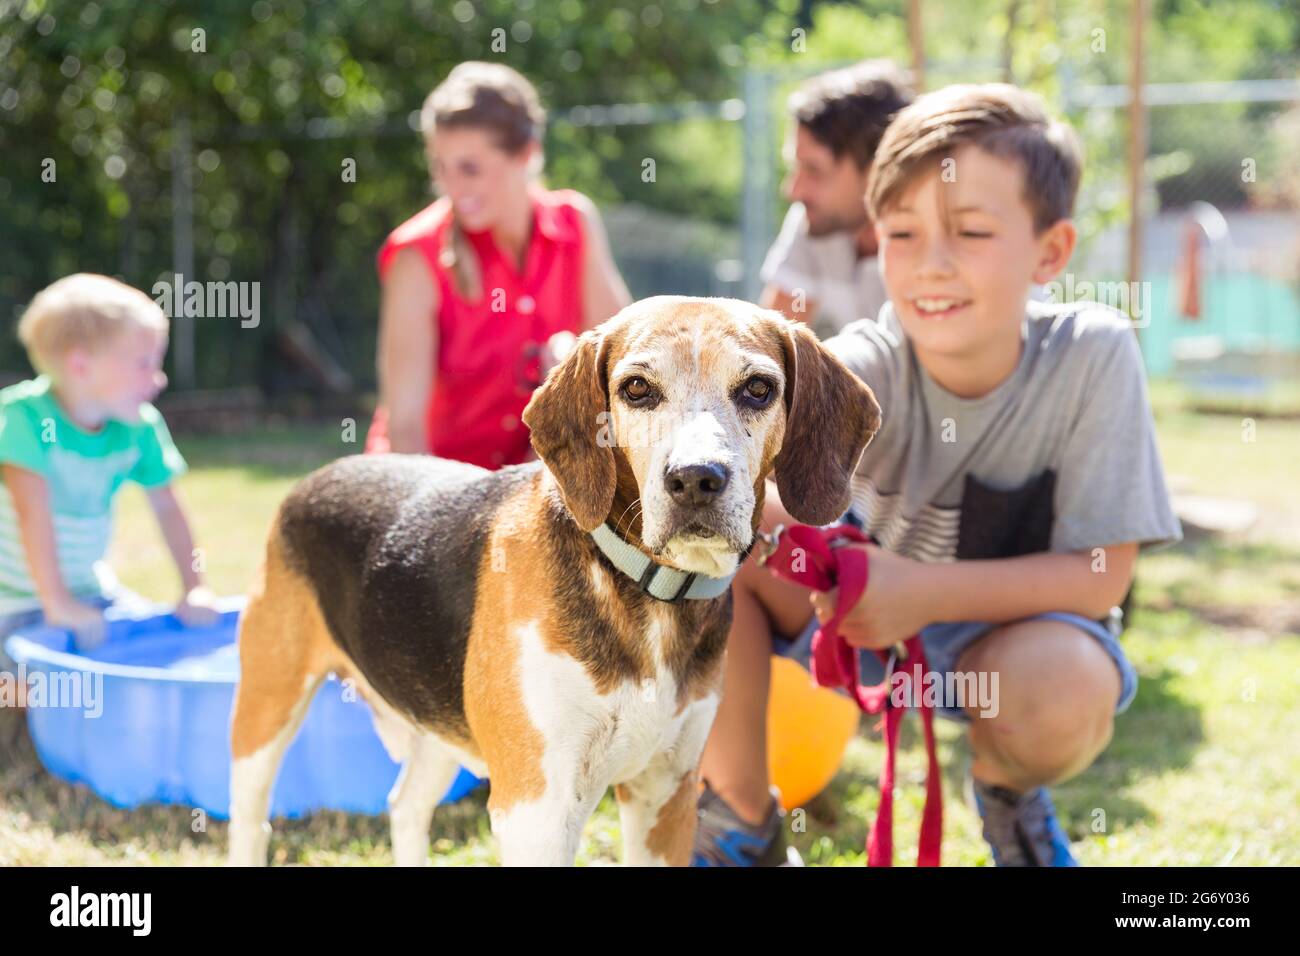 Young boy petting dog in animal shelter spending time with the pet Stock Photo